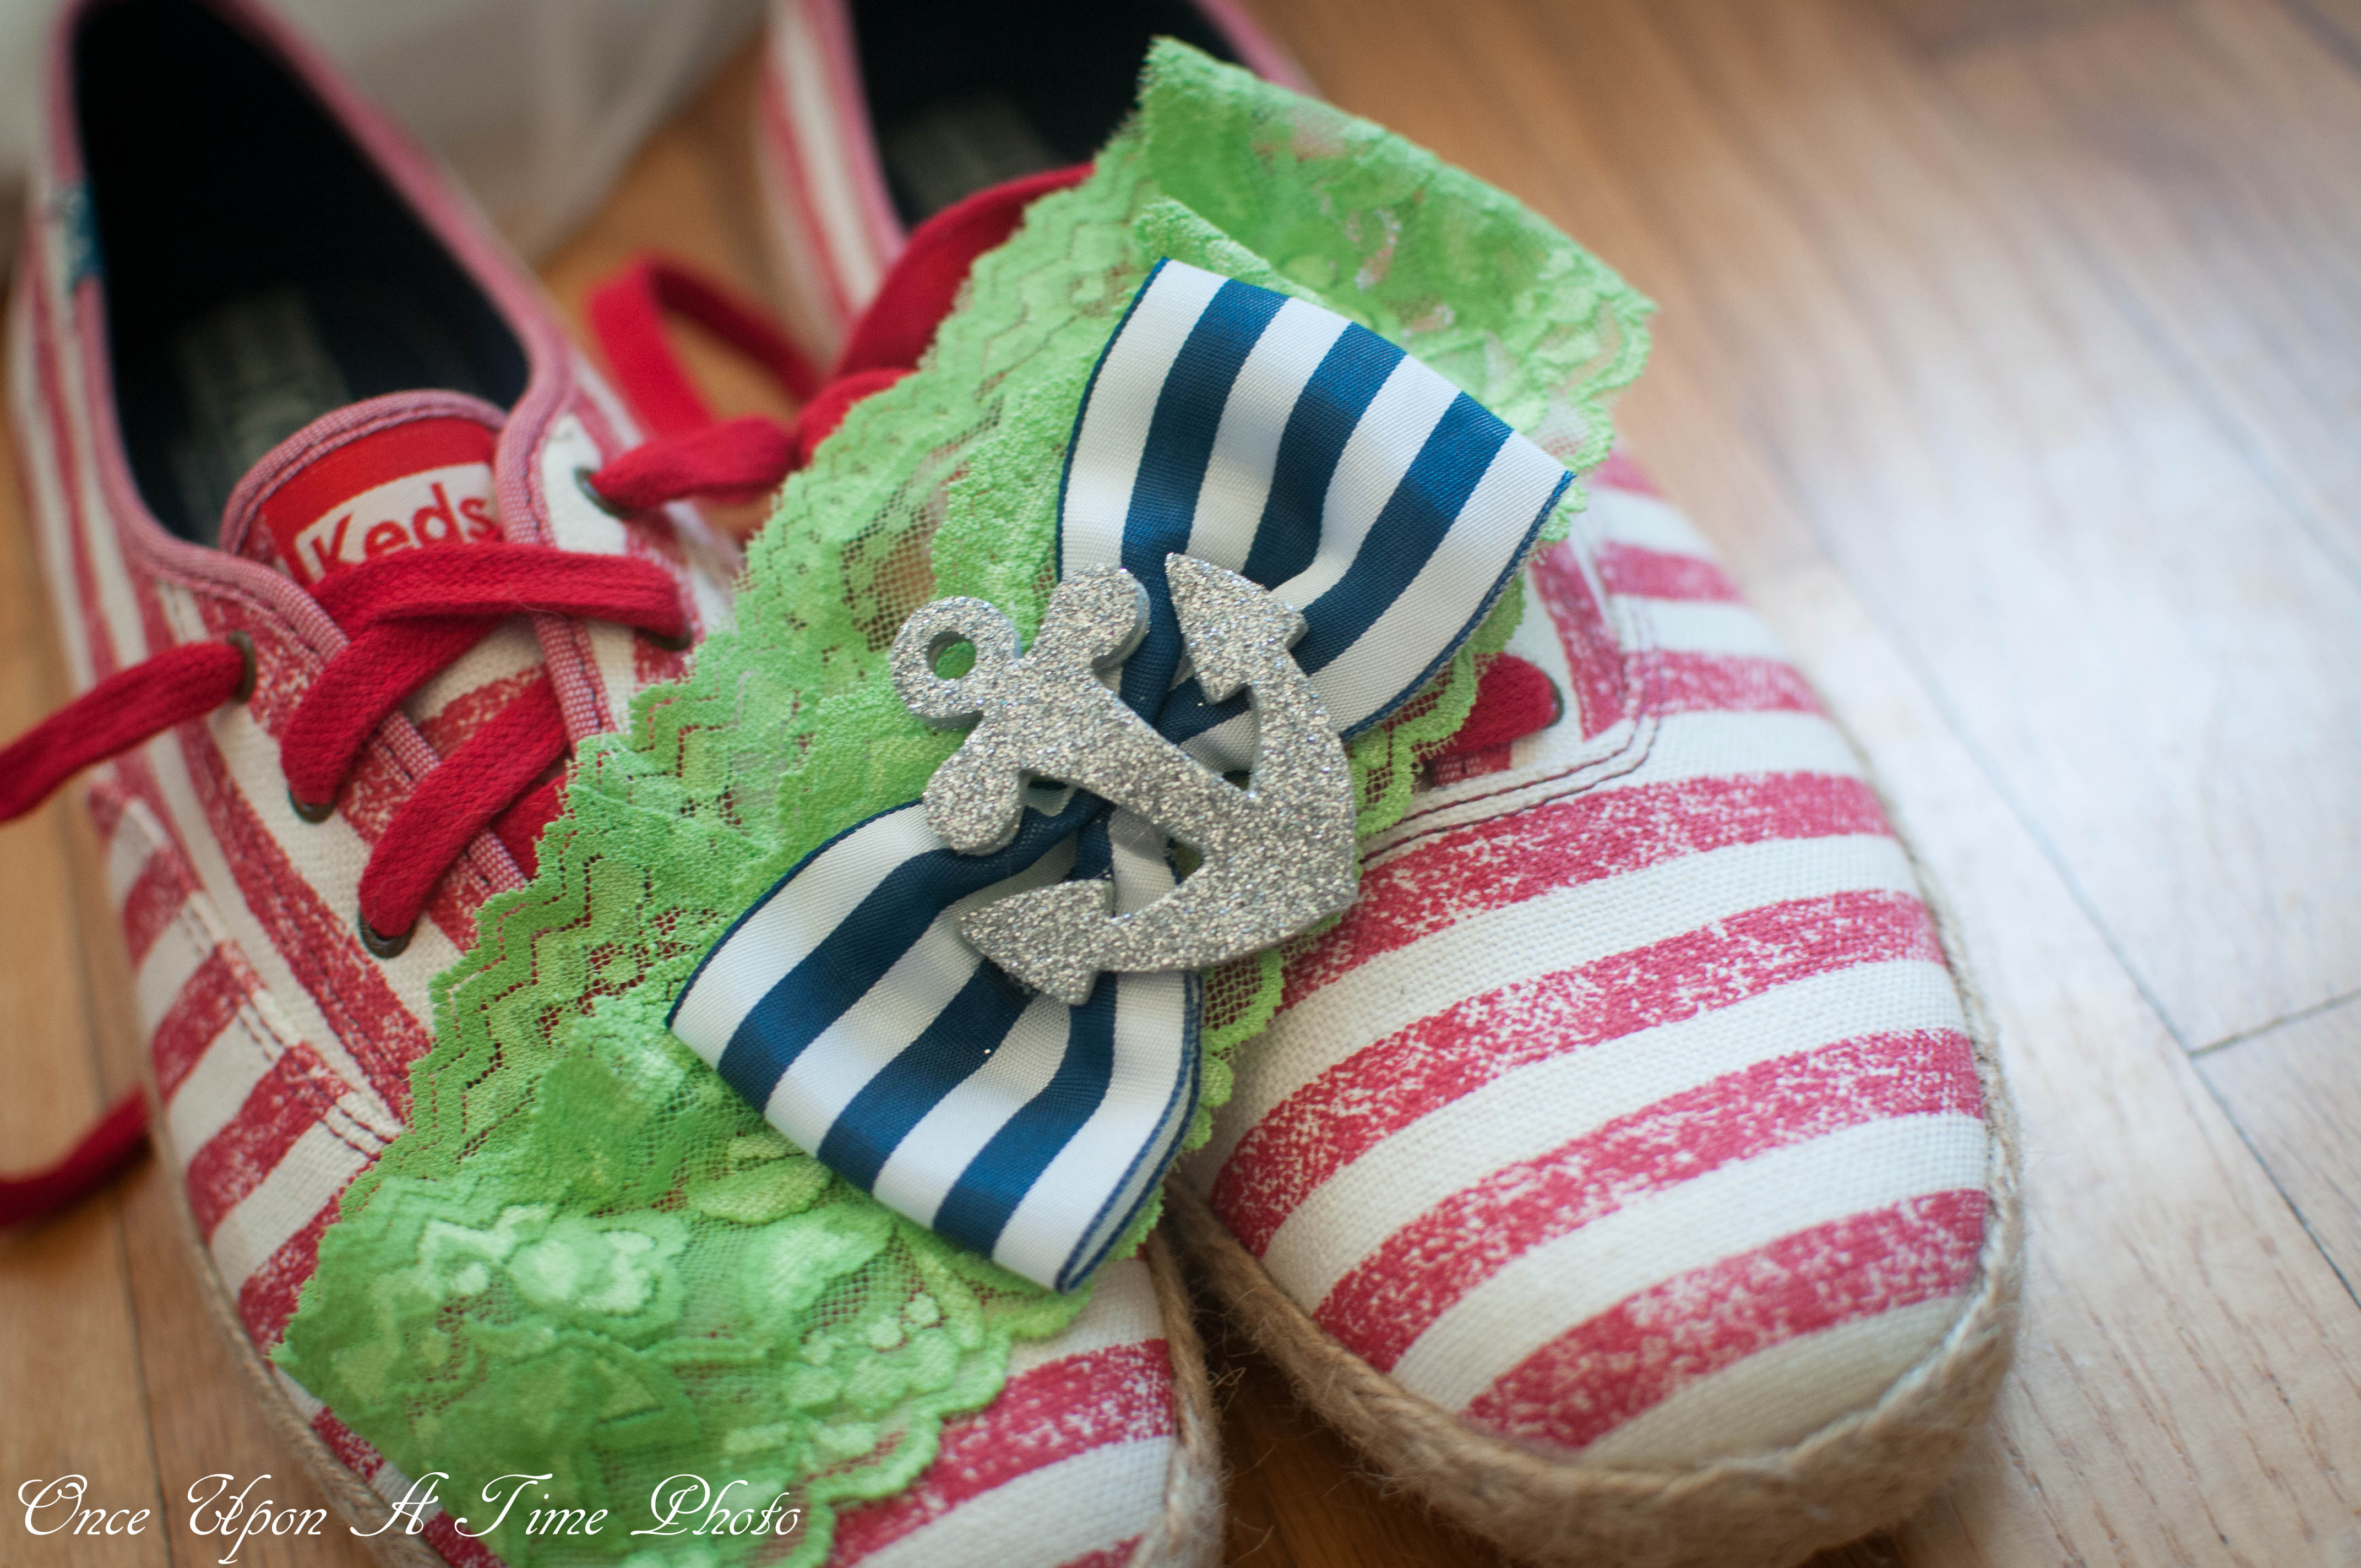 nautical blue and green garter with anchor. worn on wedding day with red, white and rope keds. | bexbernard.com